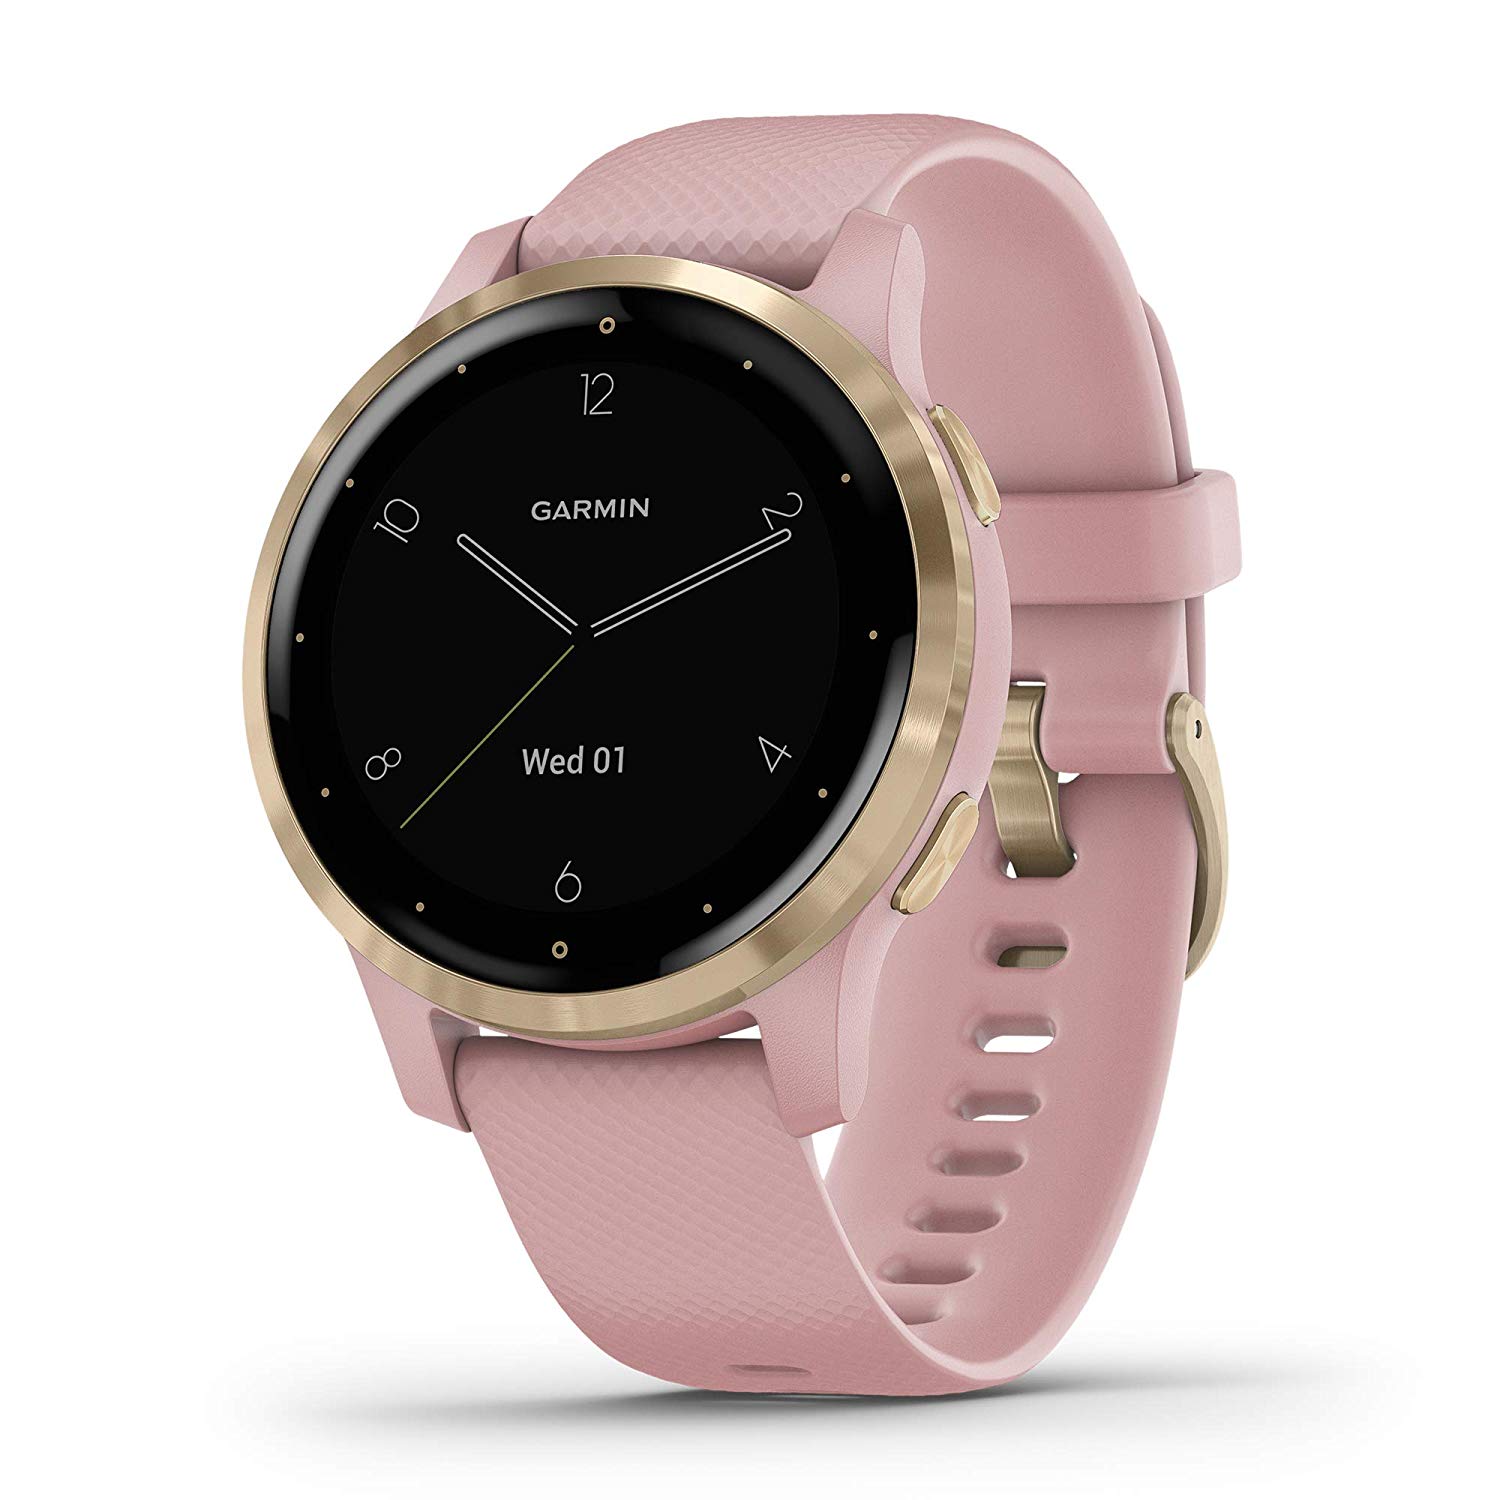 Garmin Vivoactive 4S Full Specifications and Features